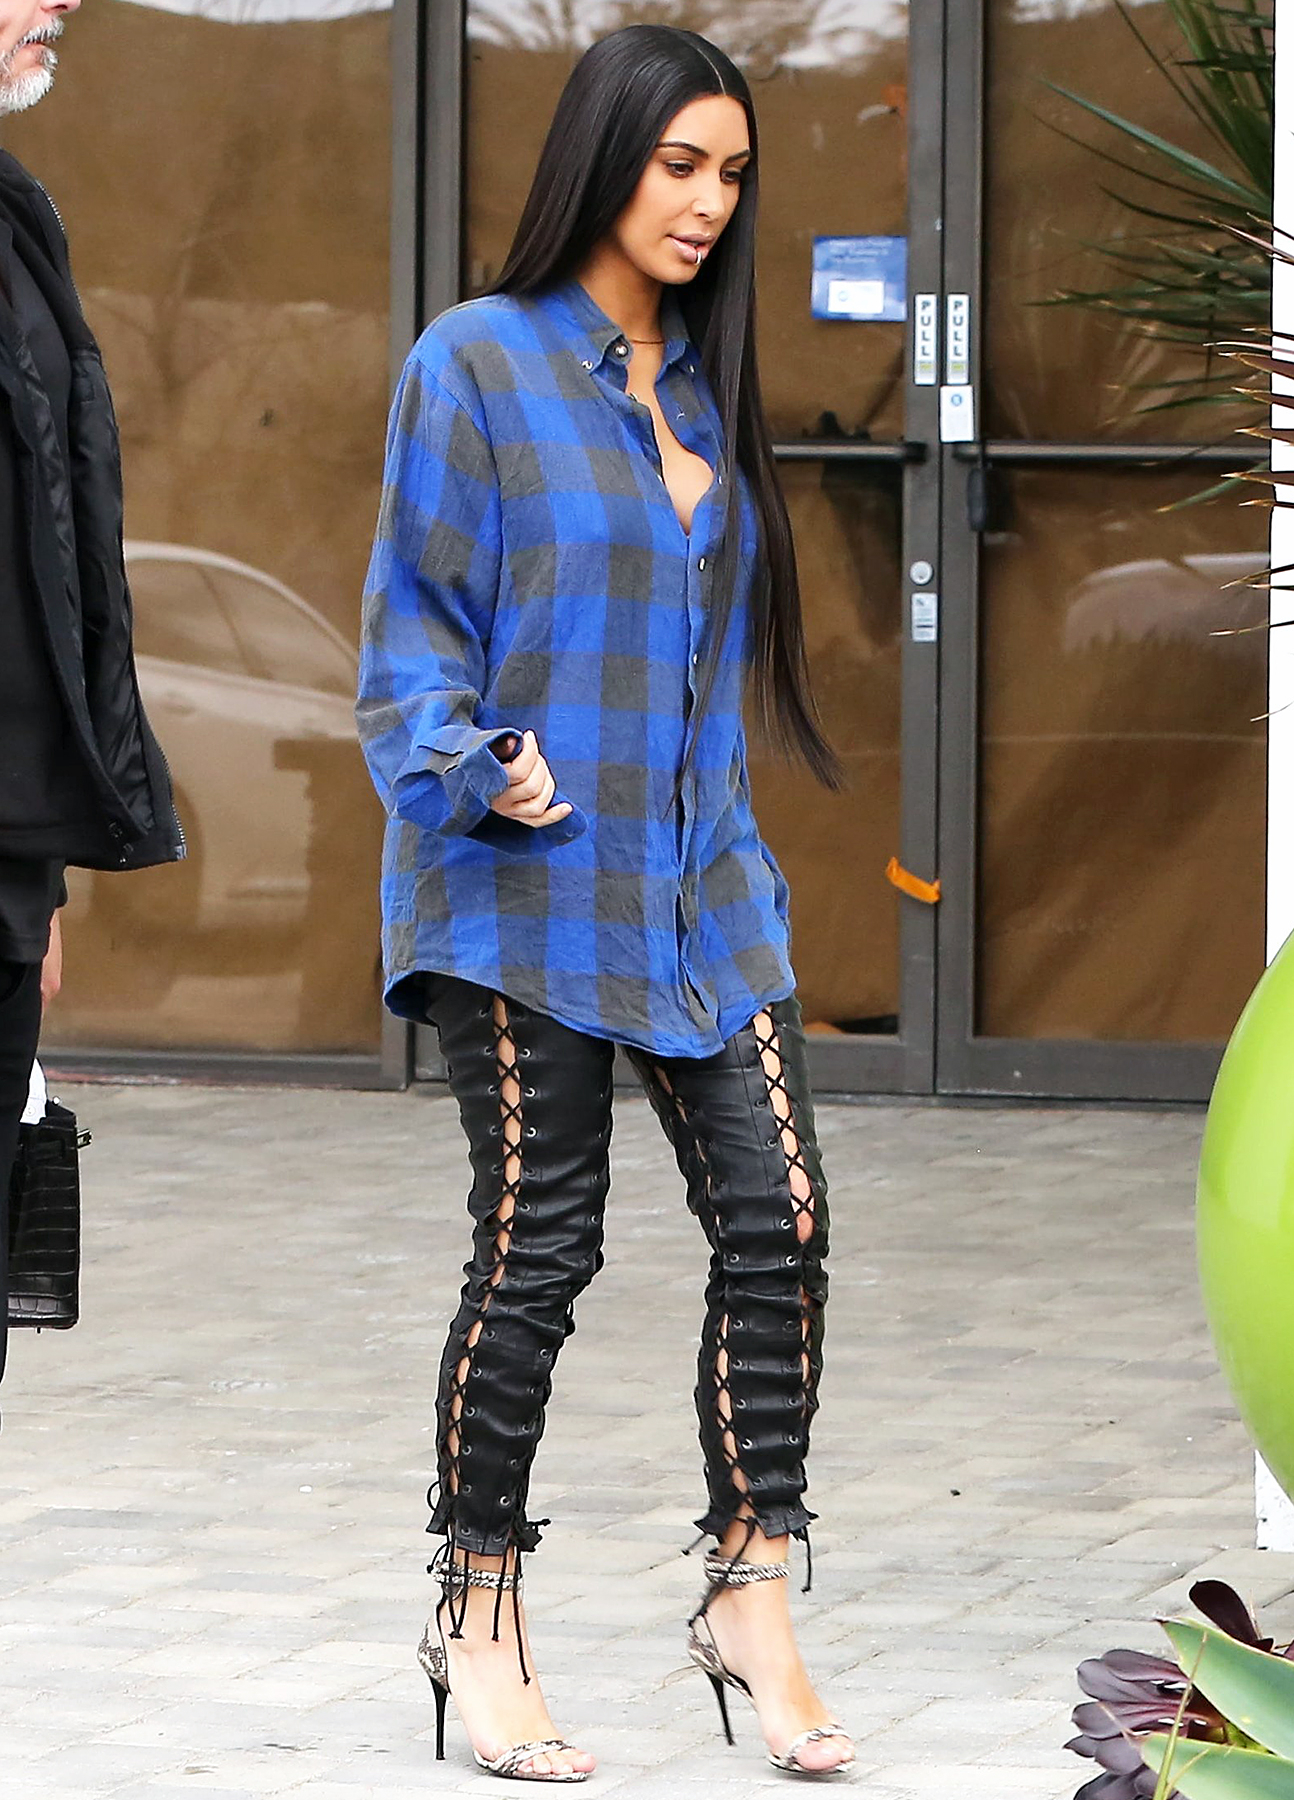 Kim Kardashian in $2,600 Lace-up Leather Pants: Love Them or Hate Them?